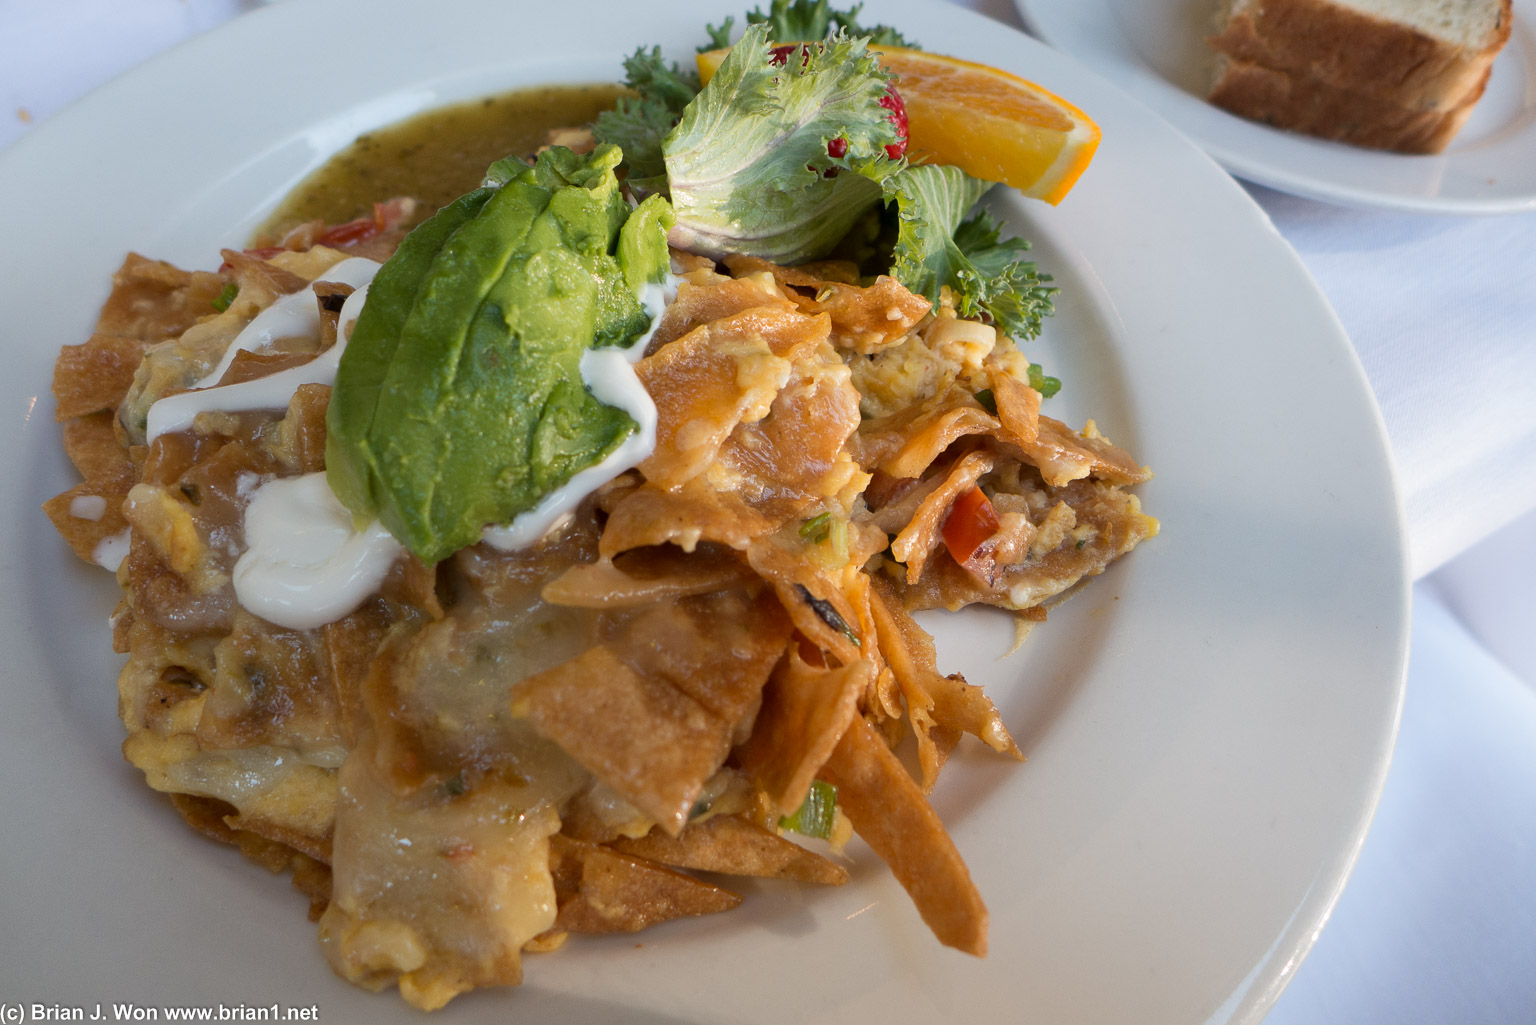 Chilaquiles. Fancy exeuction that was also pretty good. Nice and slightly crispy.